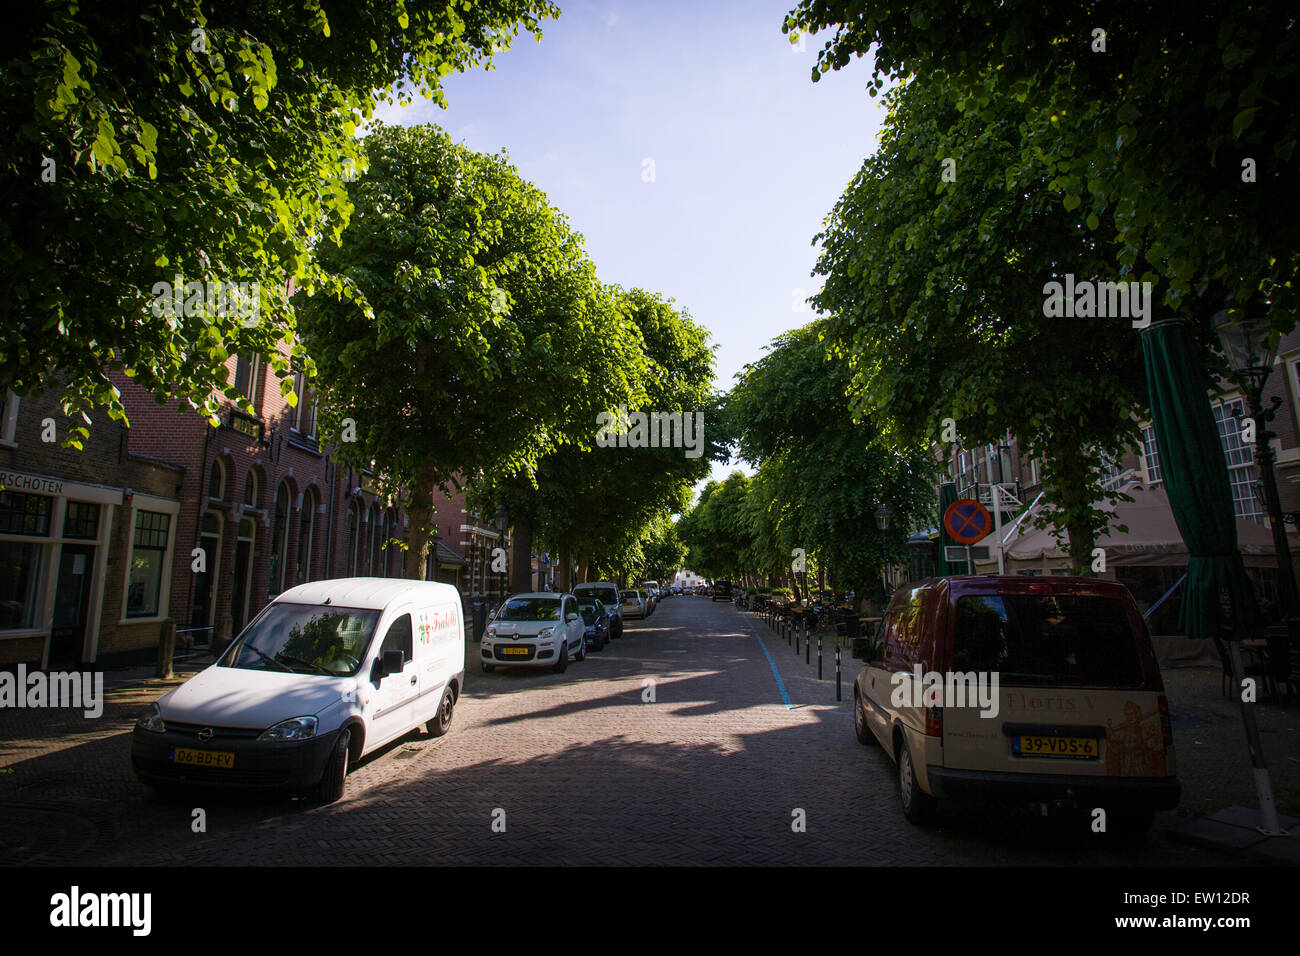 A street is seen in the old town center in a Dutch village. Stock Photo